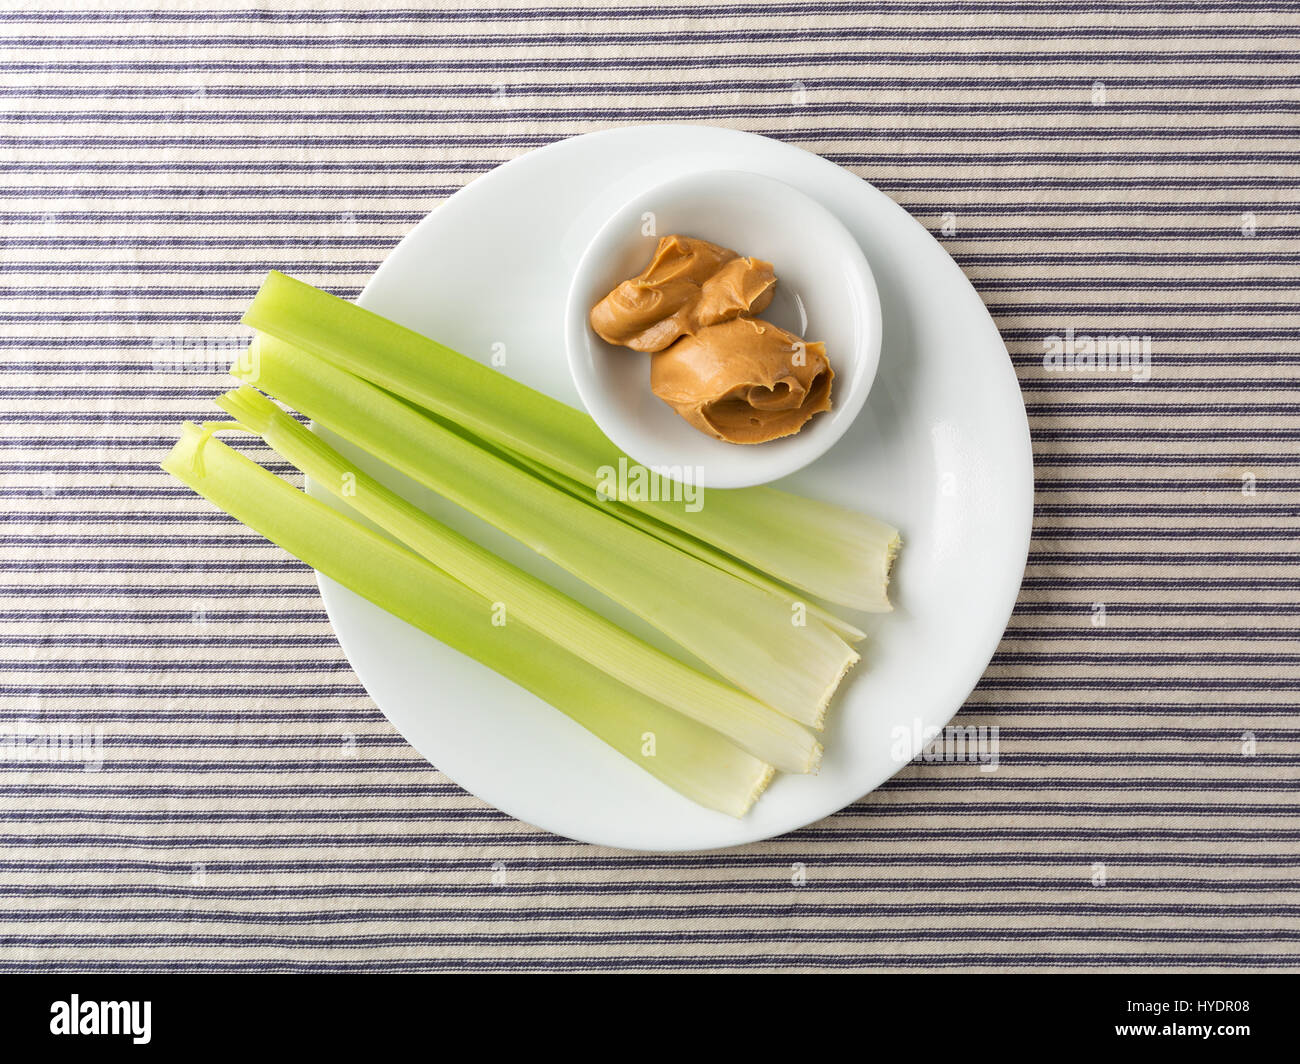 Top view of several celery stalks with a bowl of peanut butter on a white plate atop a blue striped tablecloth. Stock Photo